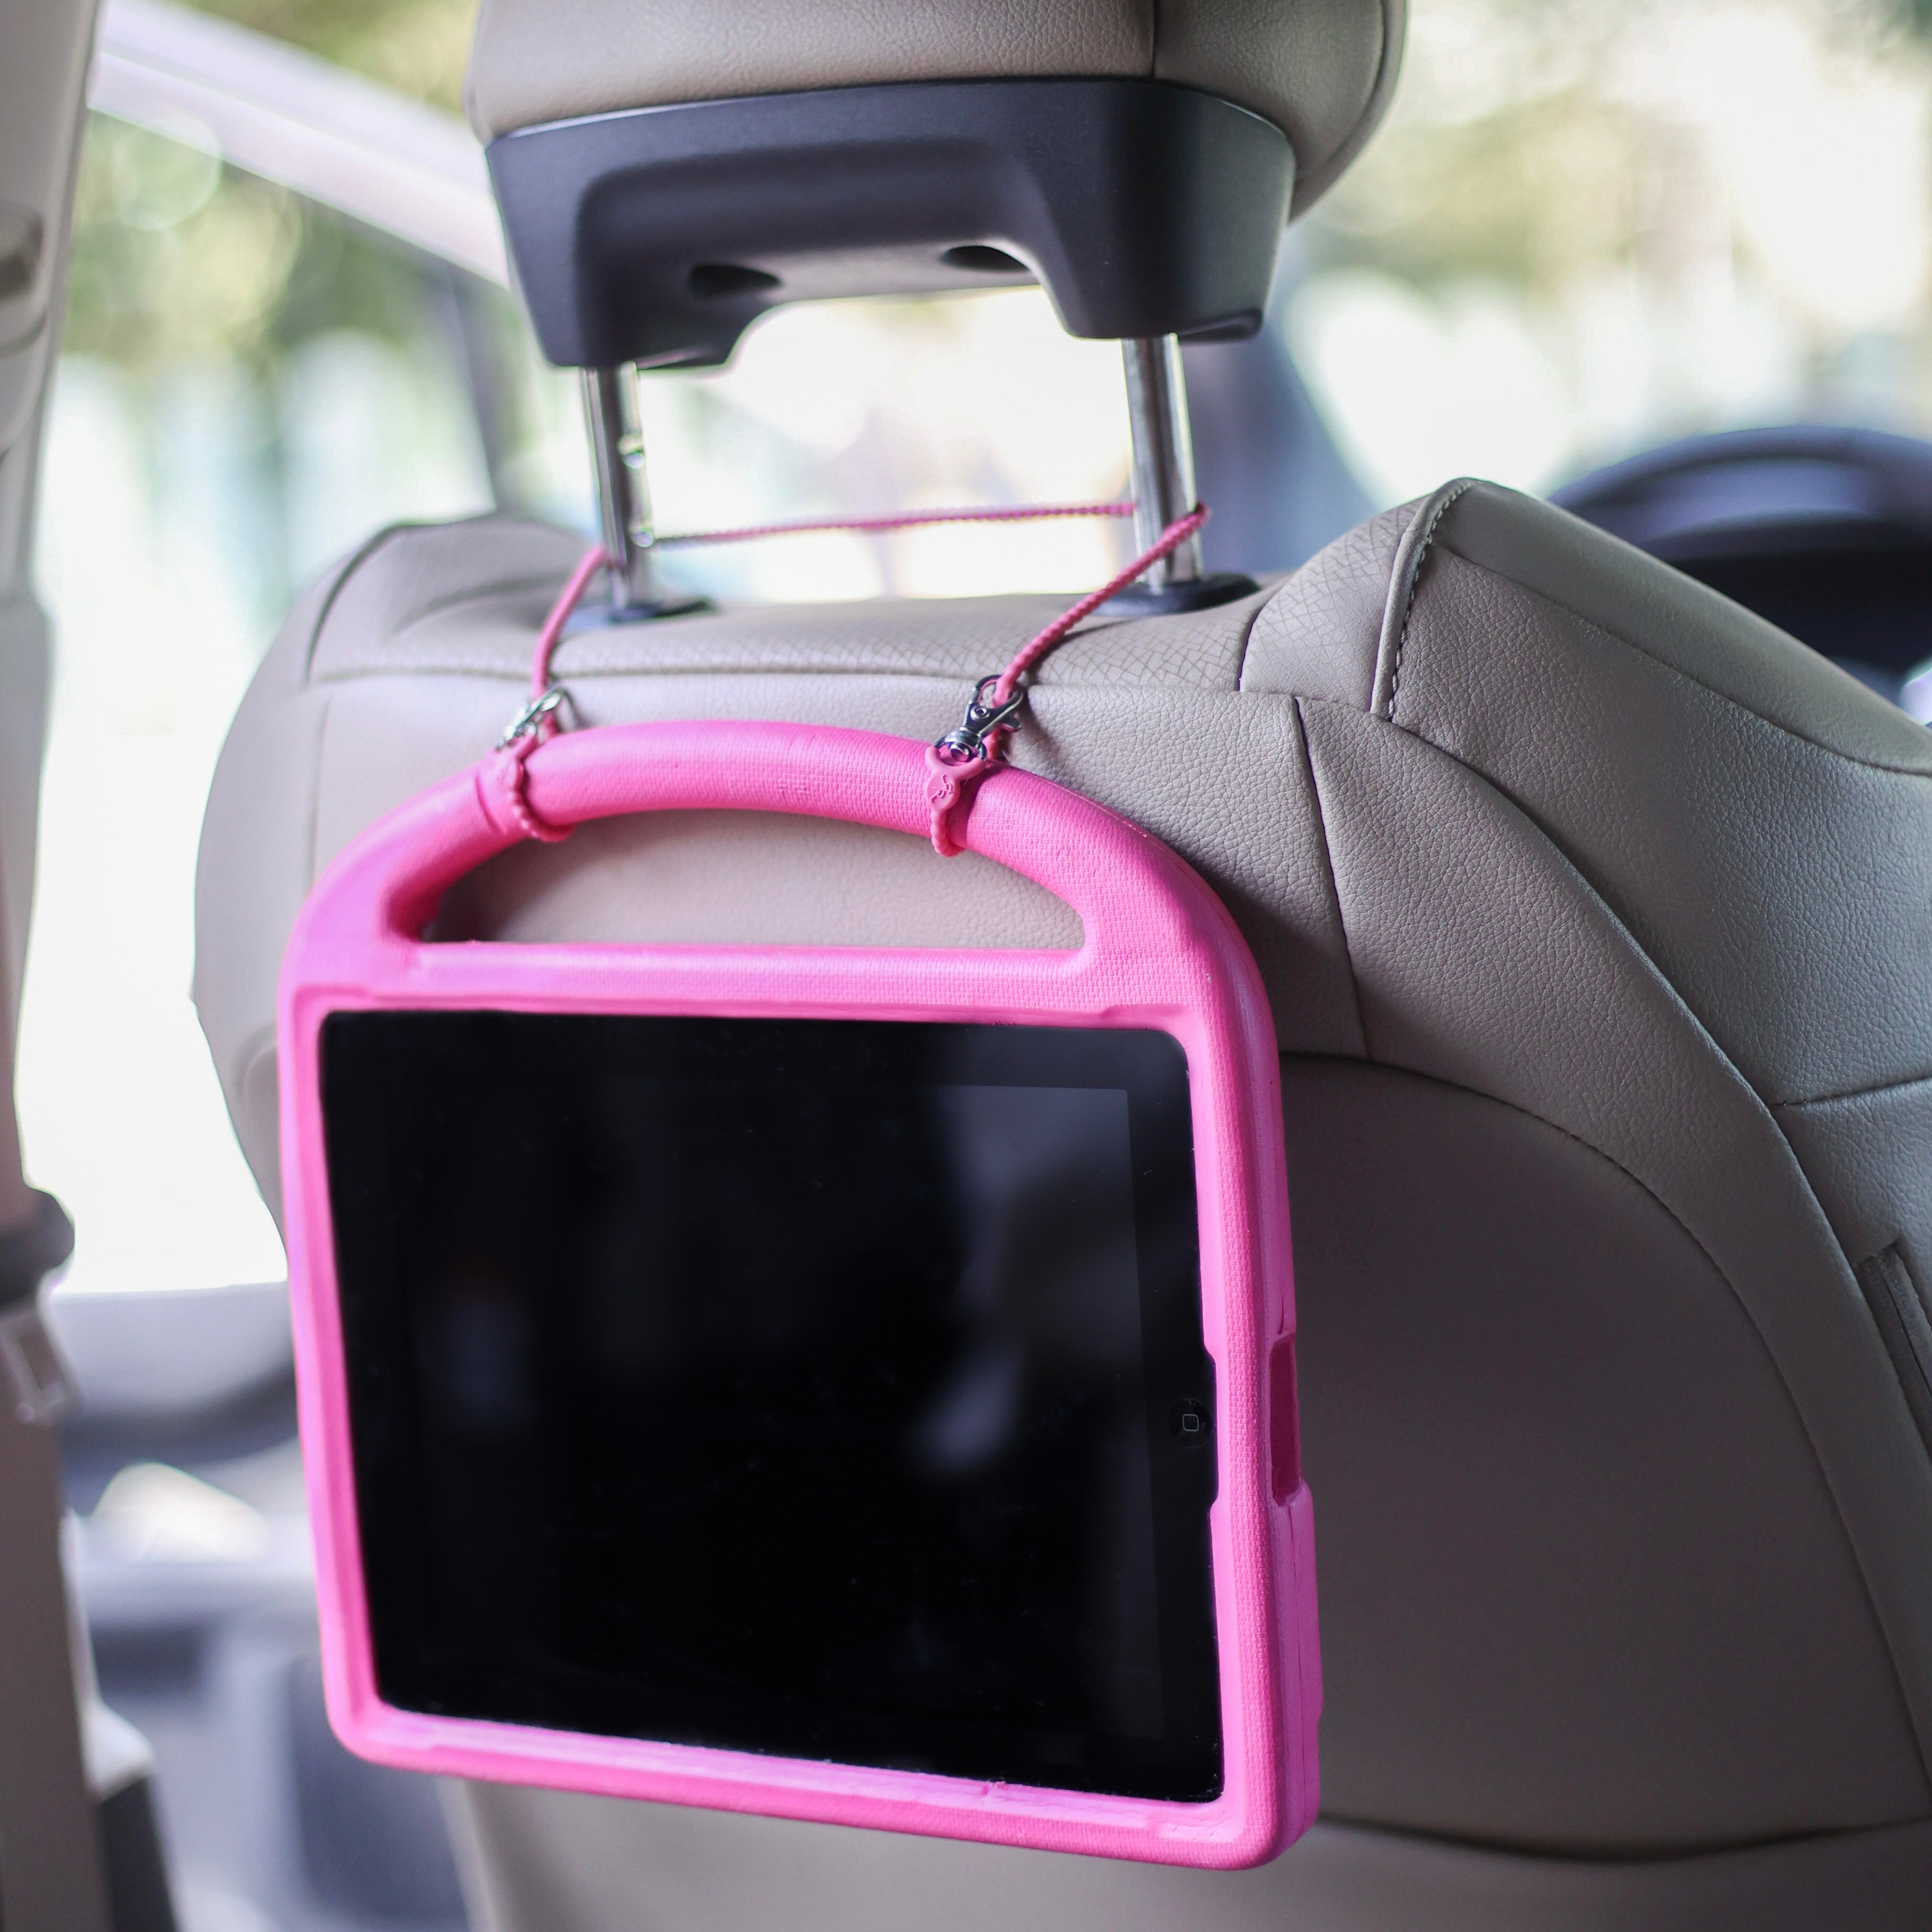 Cutie Clasp attached to a car head rest holding a tablet.